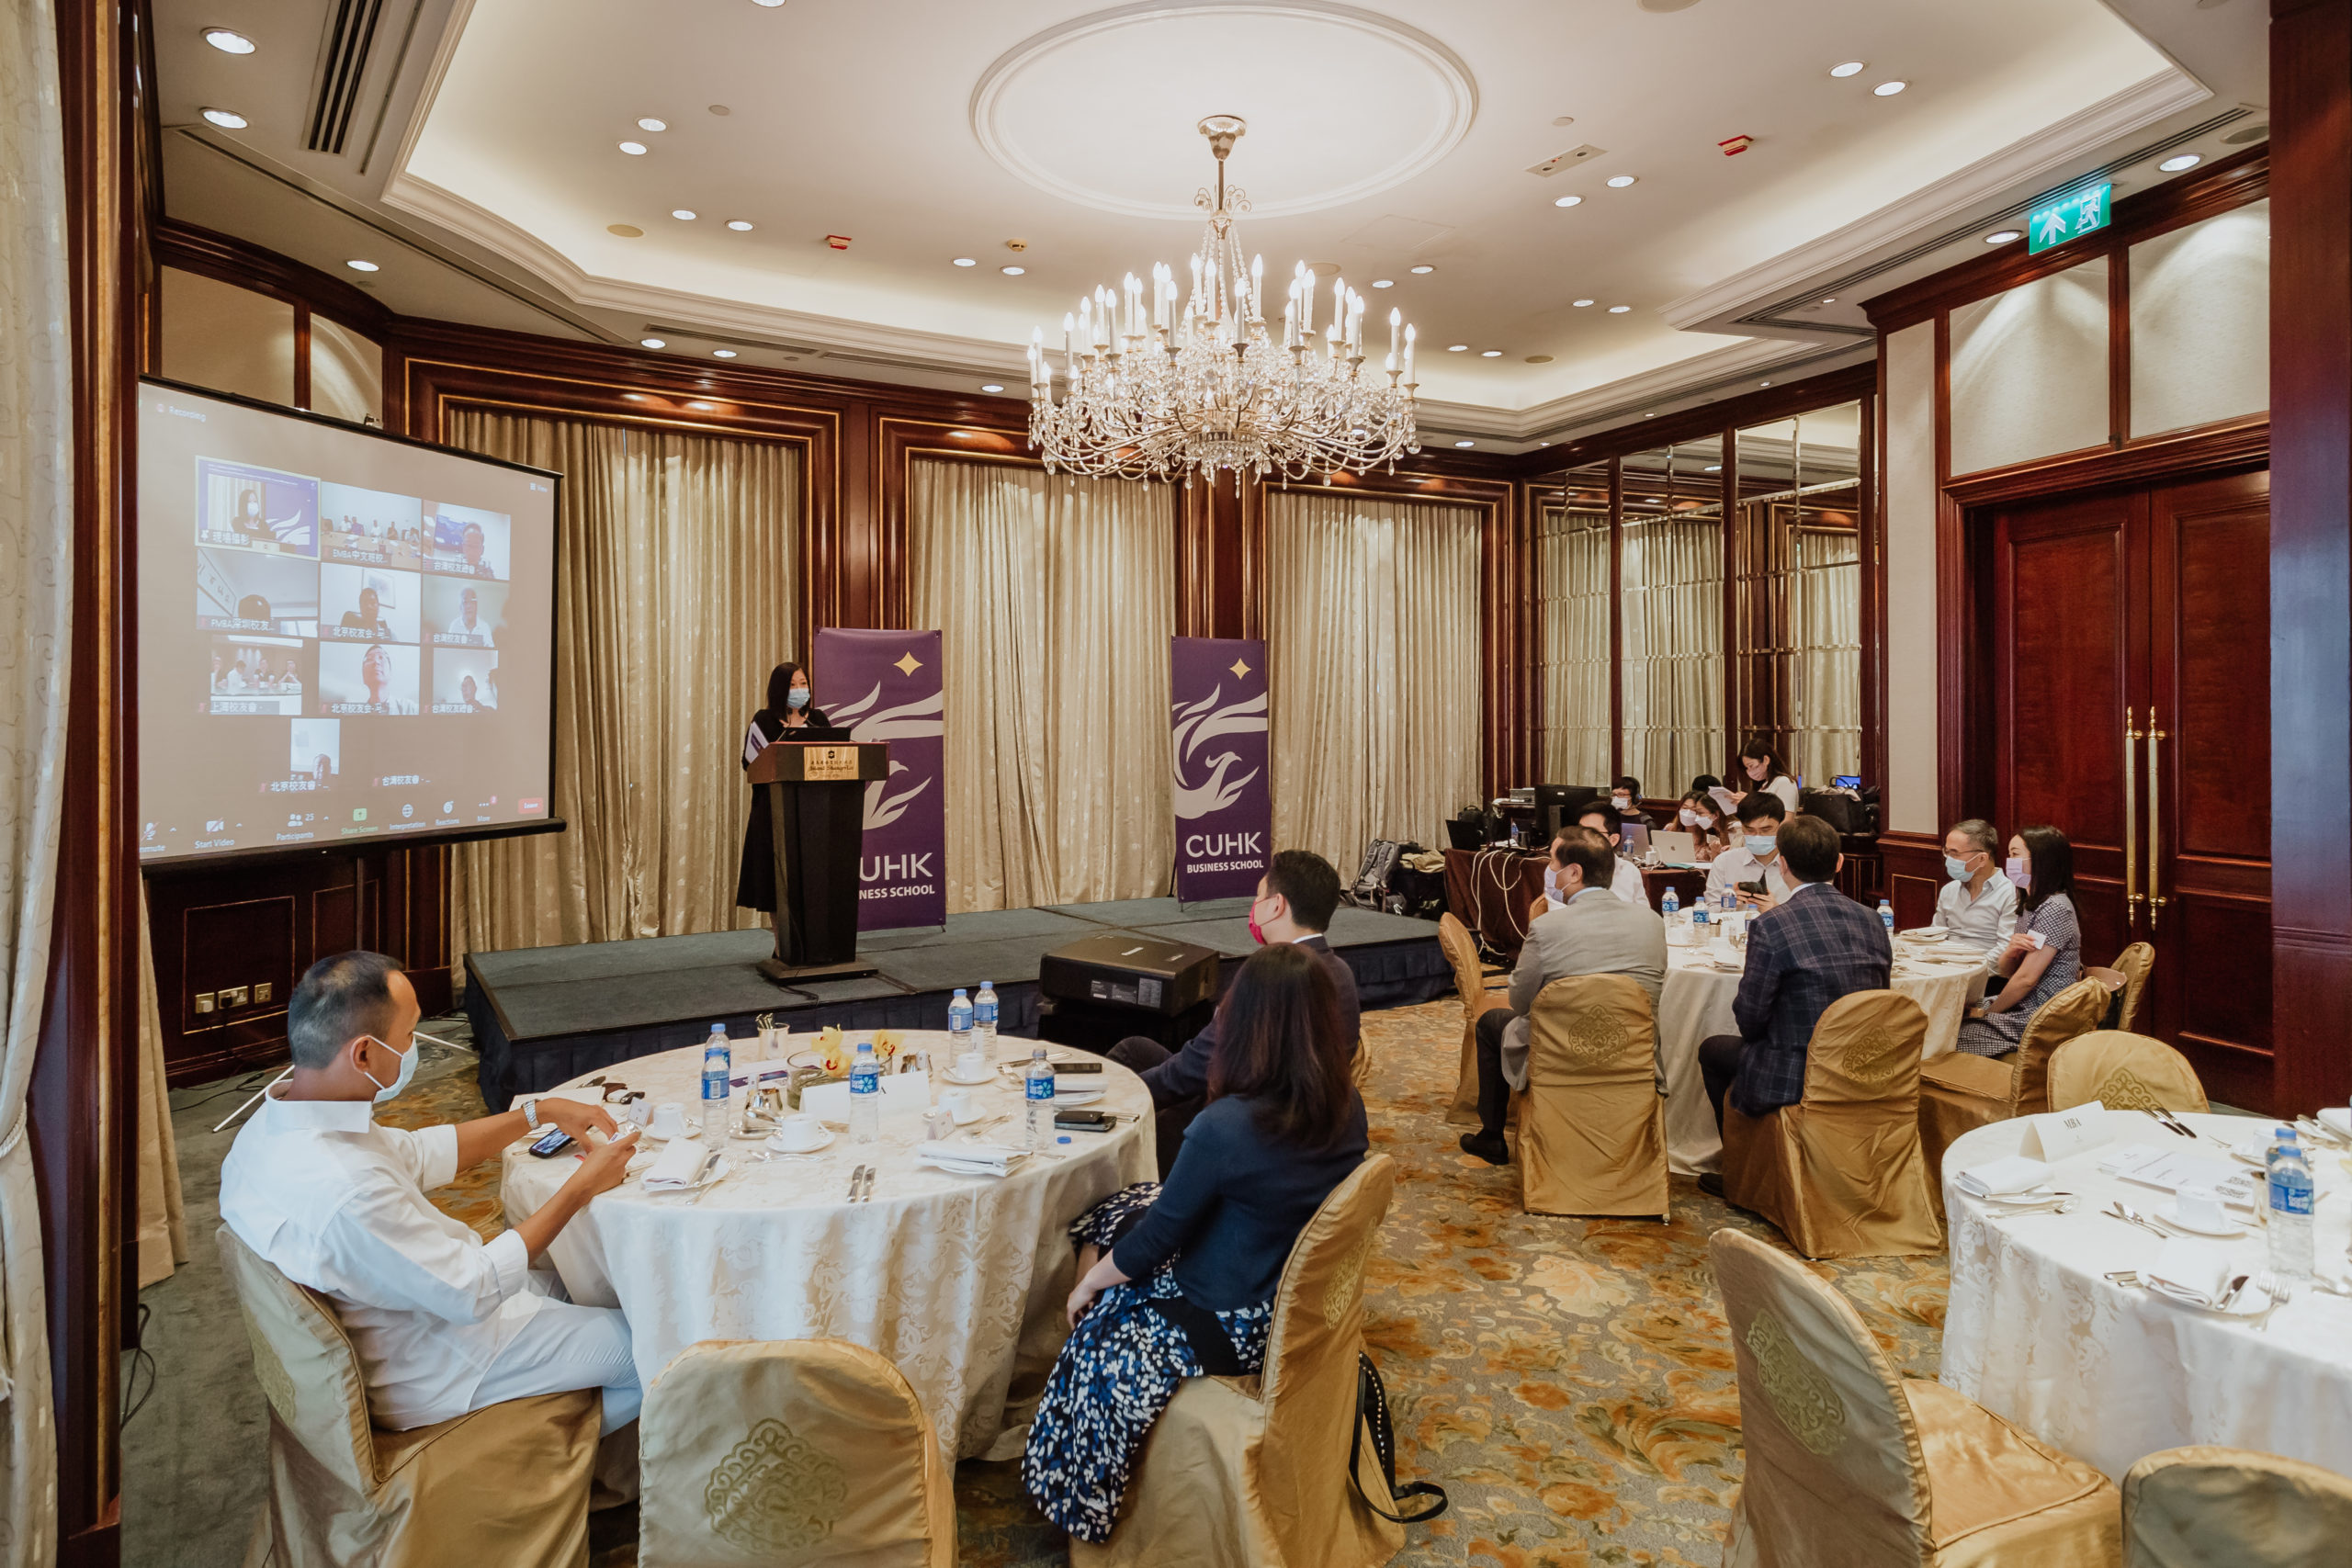 Ms Iris Liu, Administrative Director of the Alumni and Corporate Affairs Office of the CUHK Business School, shared the upcoming alumni engagement plans and encouraged the AAs to extend their impact in the wider alumni community.